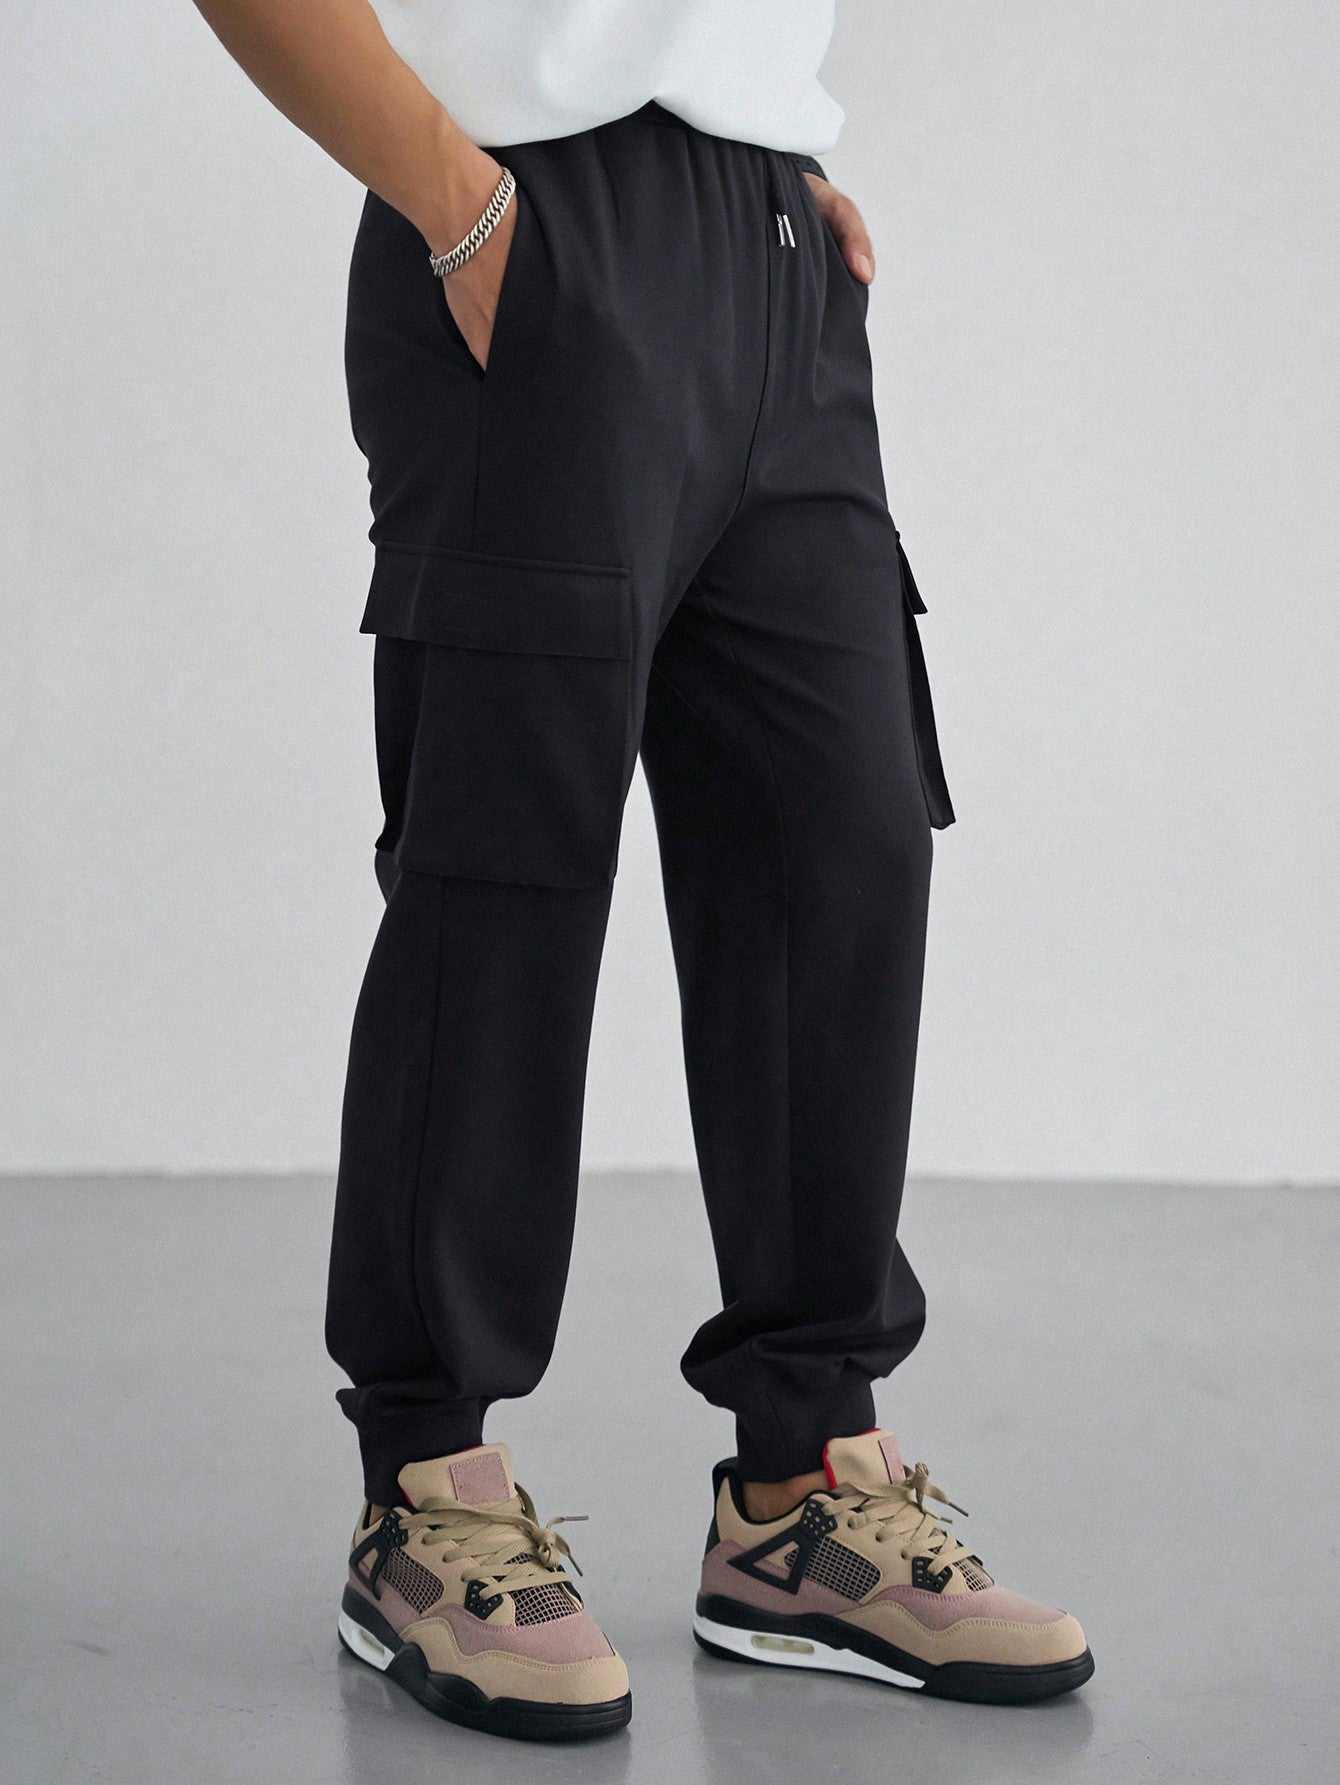 Kpop Men's Workwear Pants With Pockets And Drawstring Waist